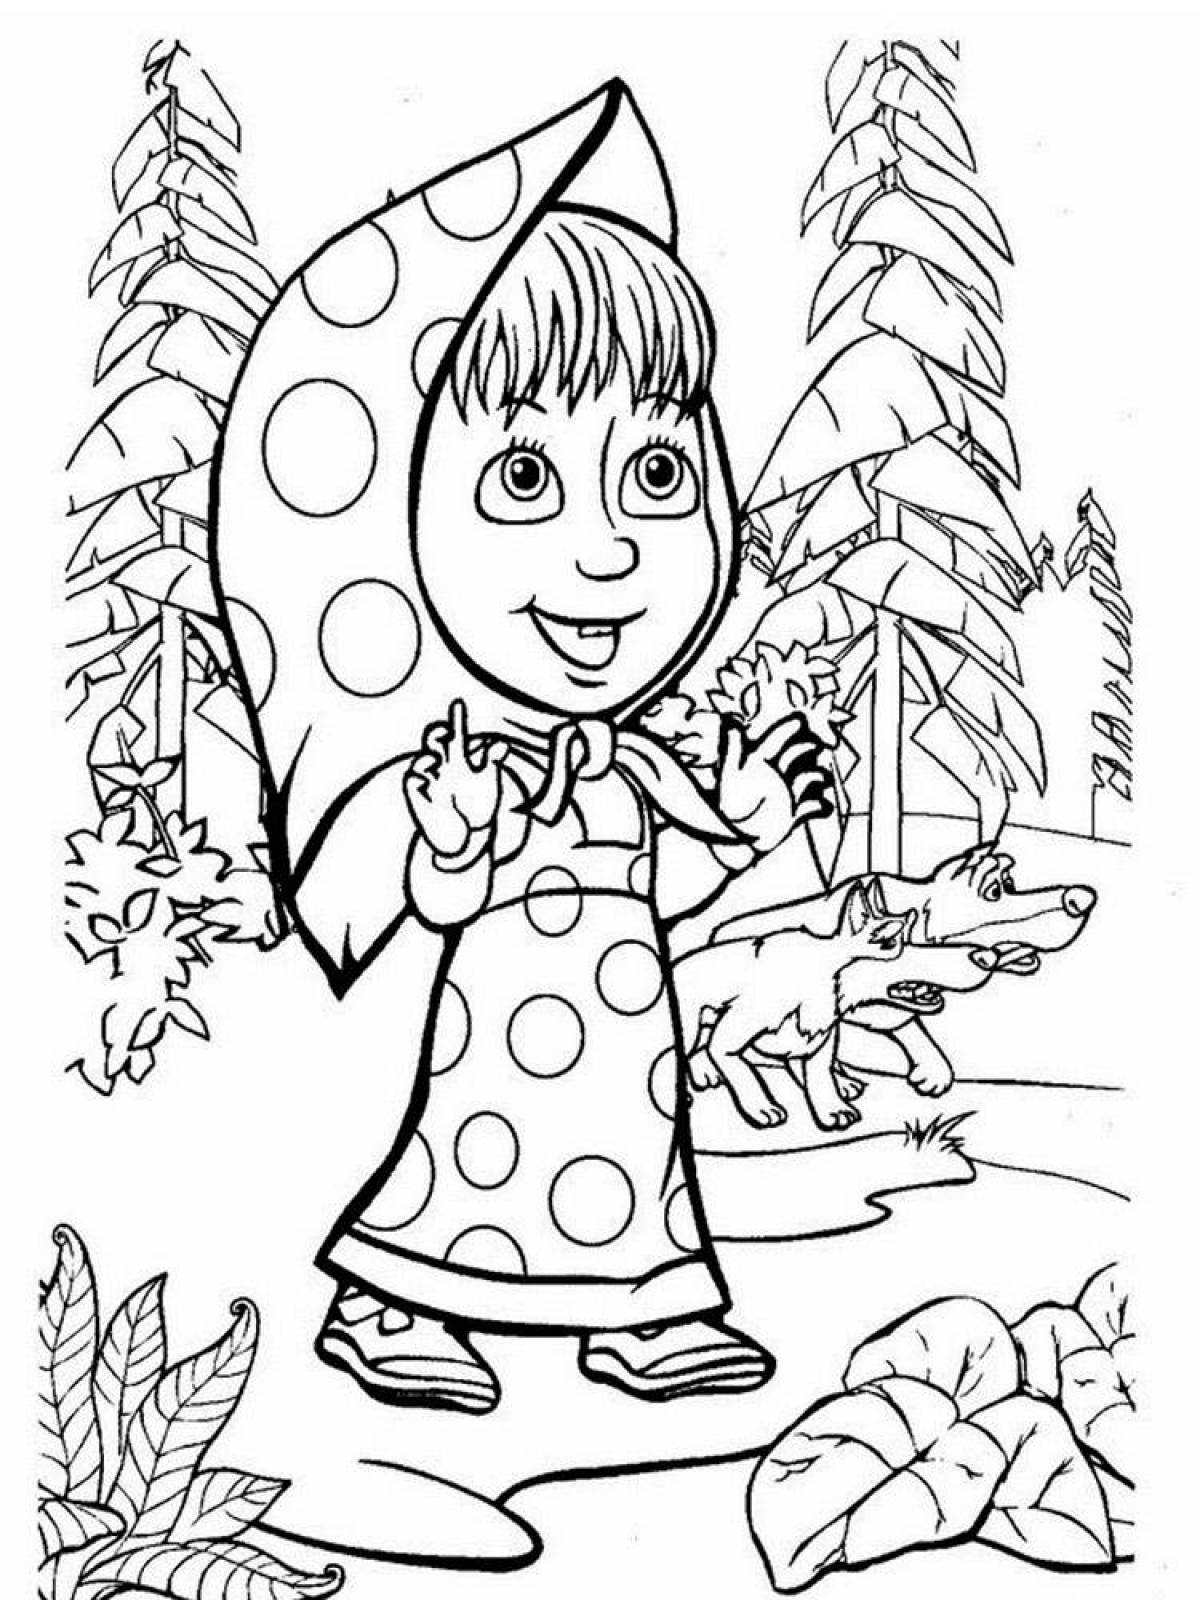 Glowing Masha and the bear coloring page